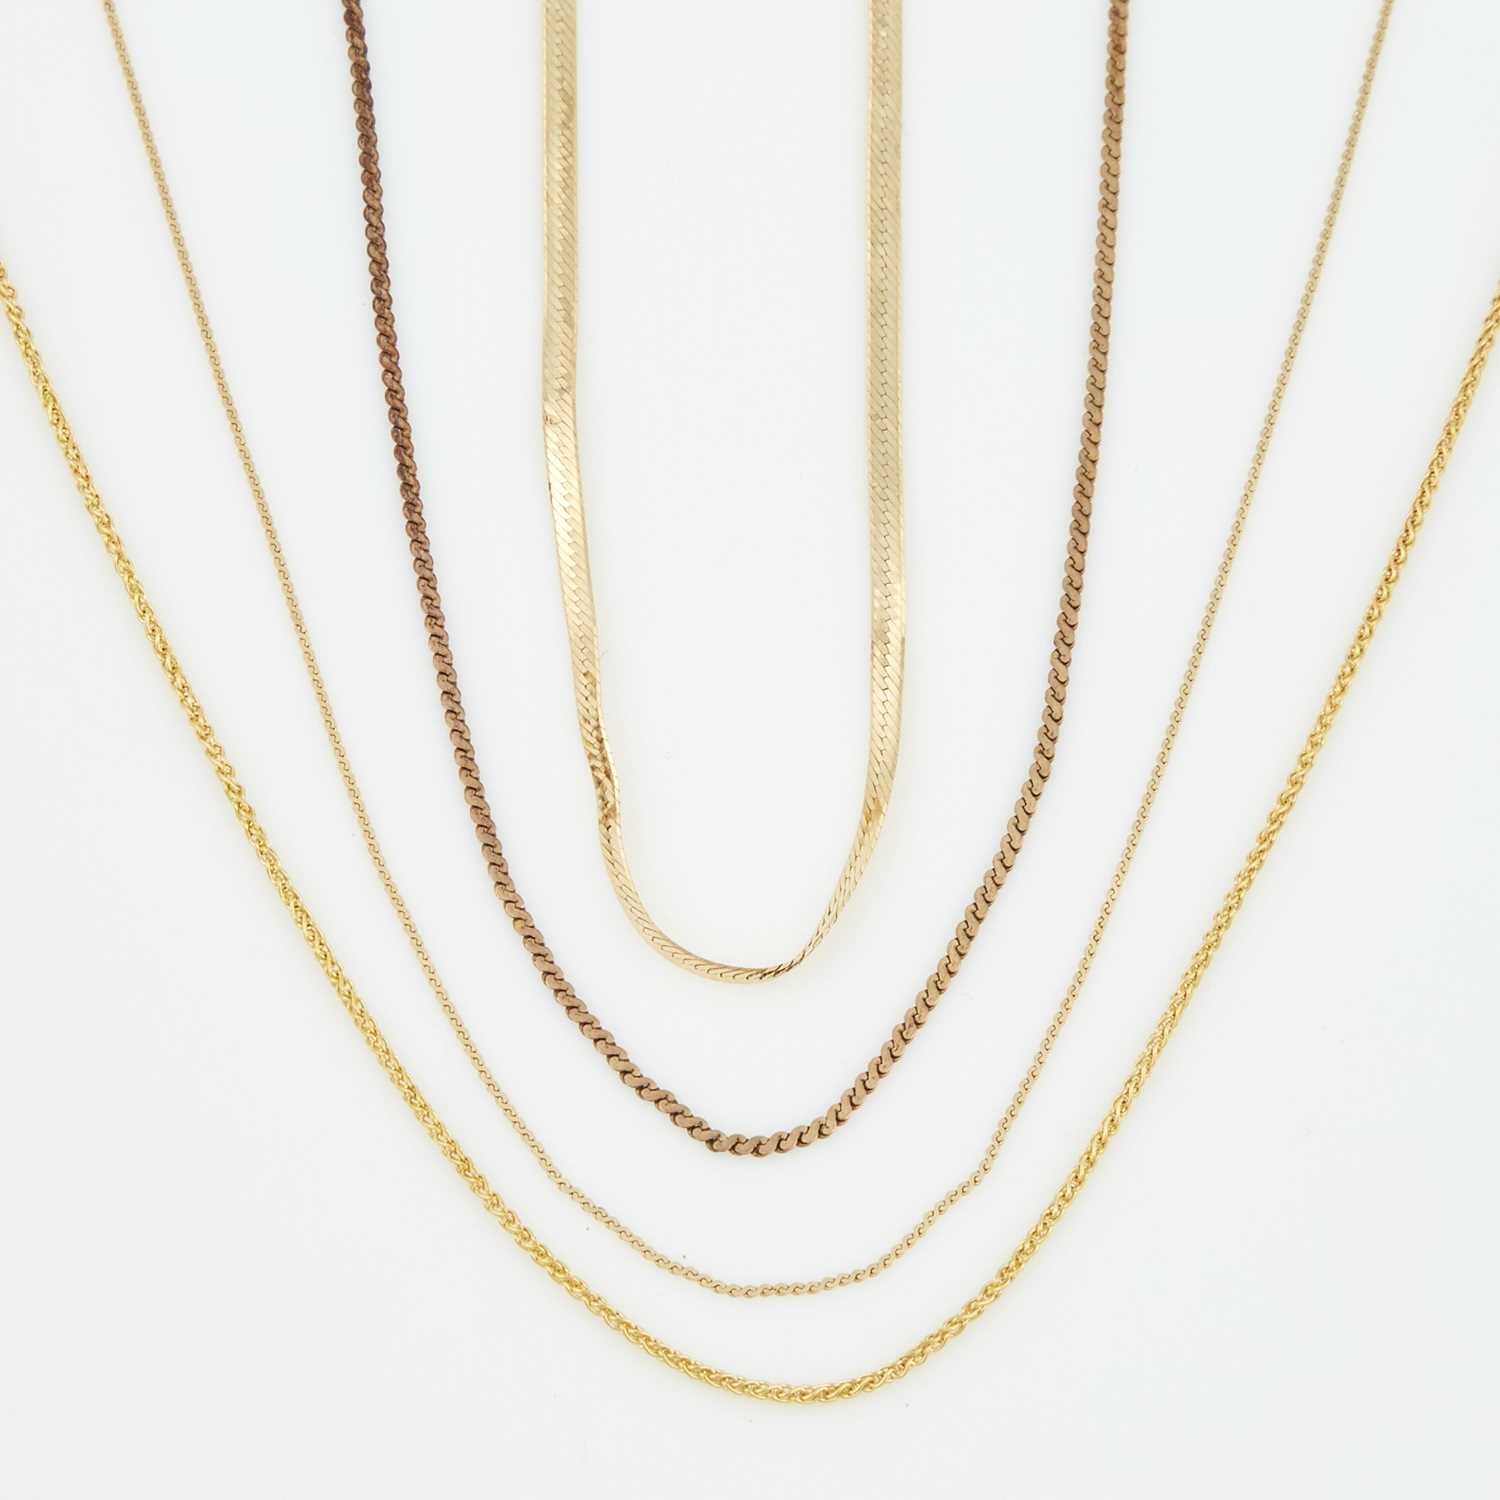 Lot 84 - Four Gold Neck Chains, 14K 8 dwt. with metal clasps, damaged